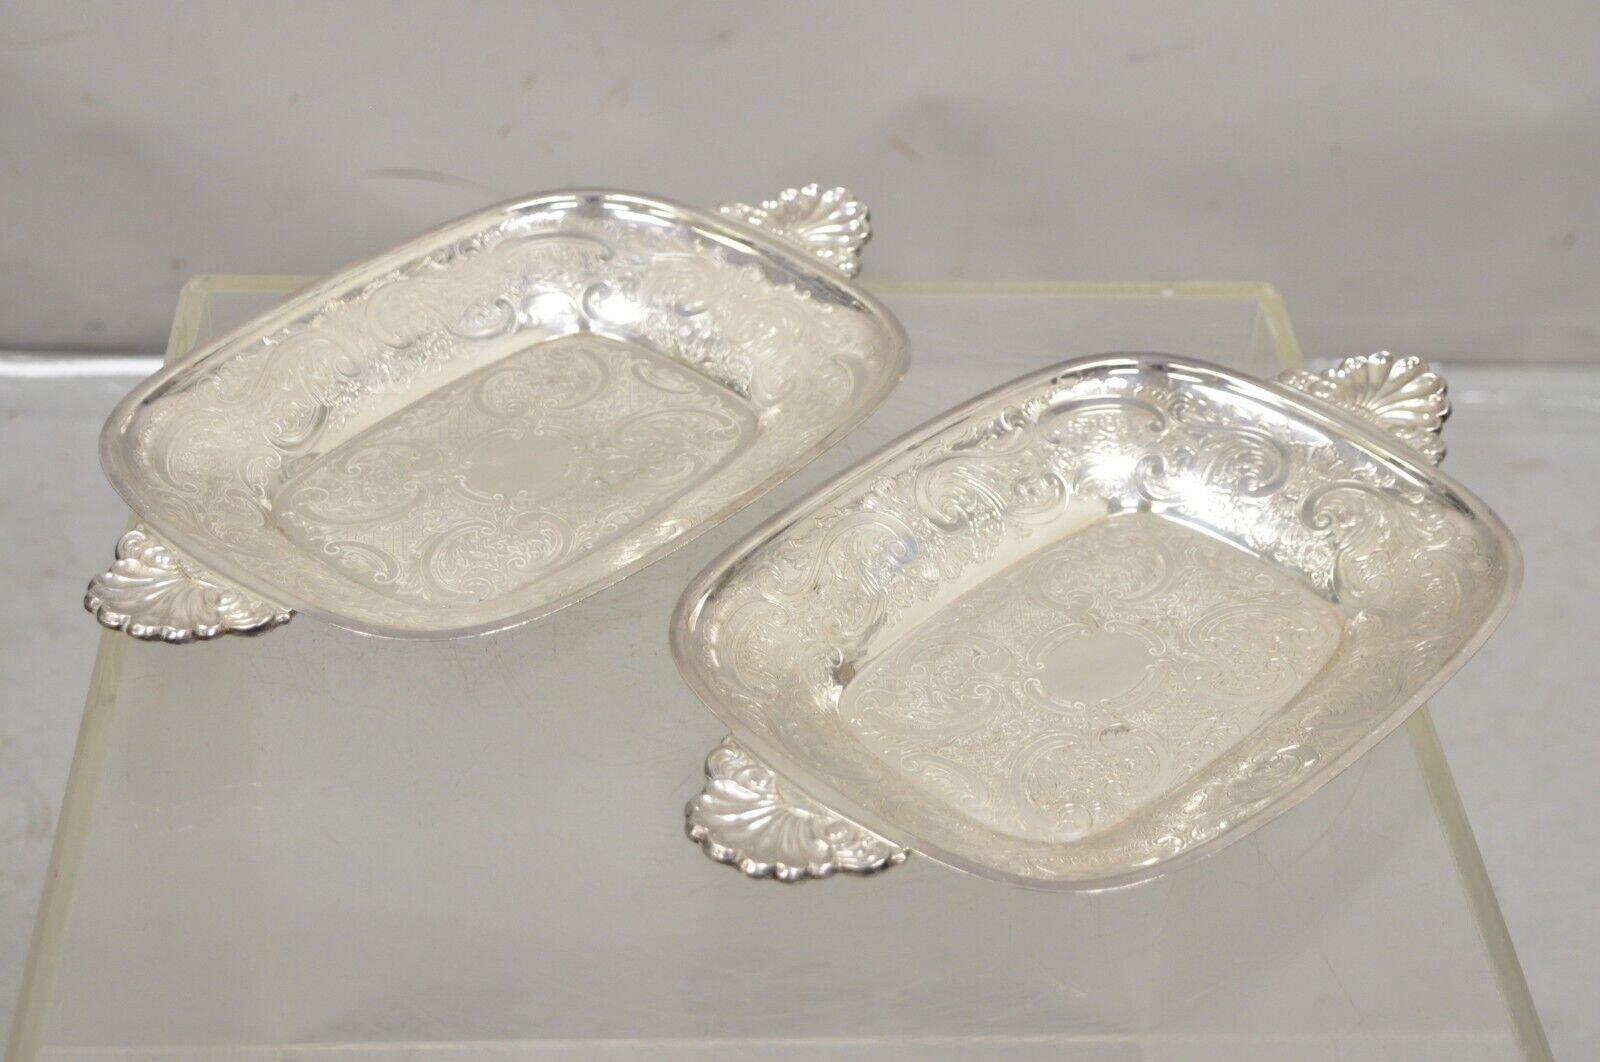 Vintage Barker Ellis England EPCA Silver Plated Shell Handle Etched Candy Dish - a Pair. Circa Mid to Late 20th Century Measurements:  1.5